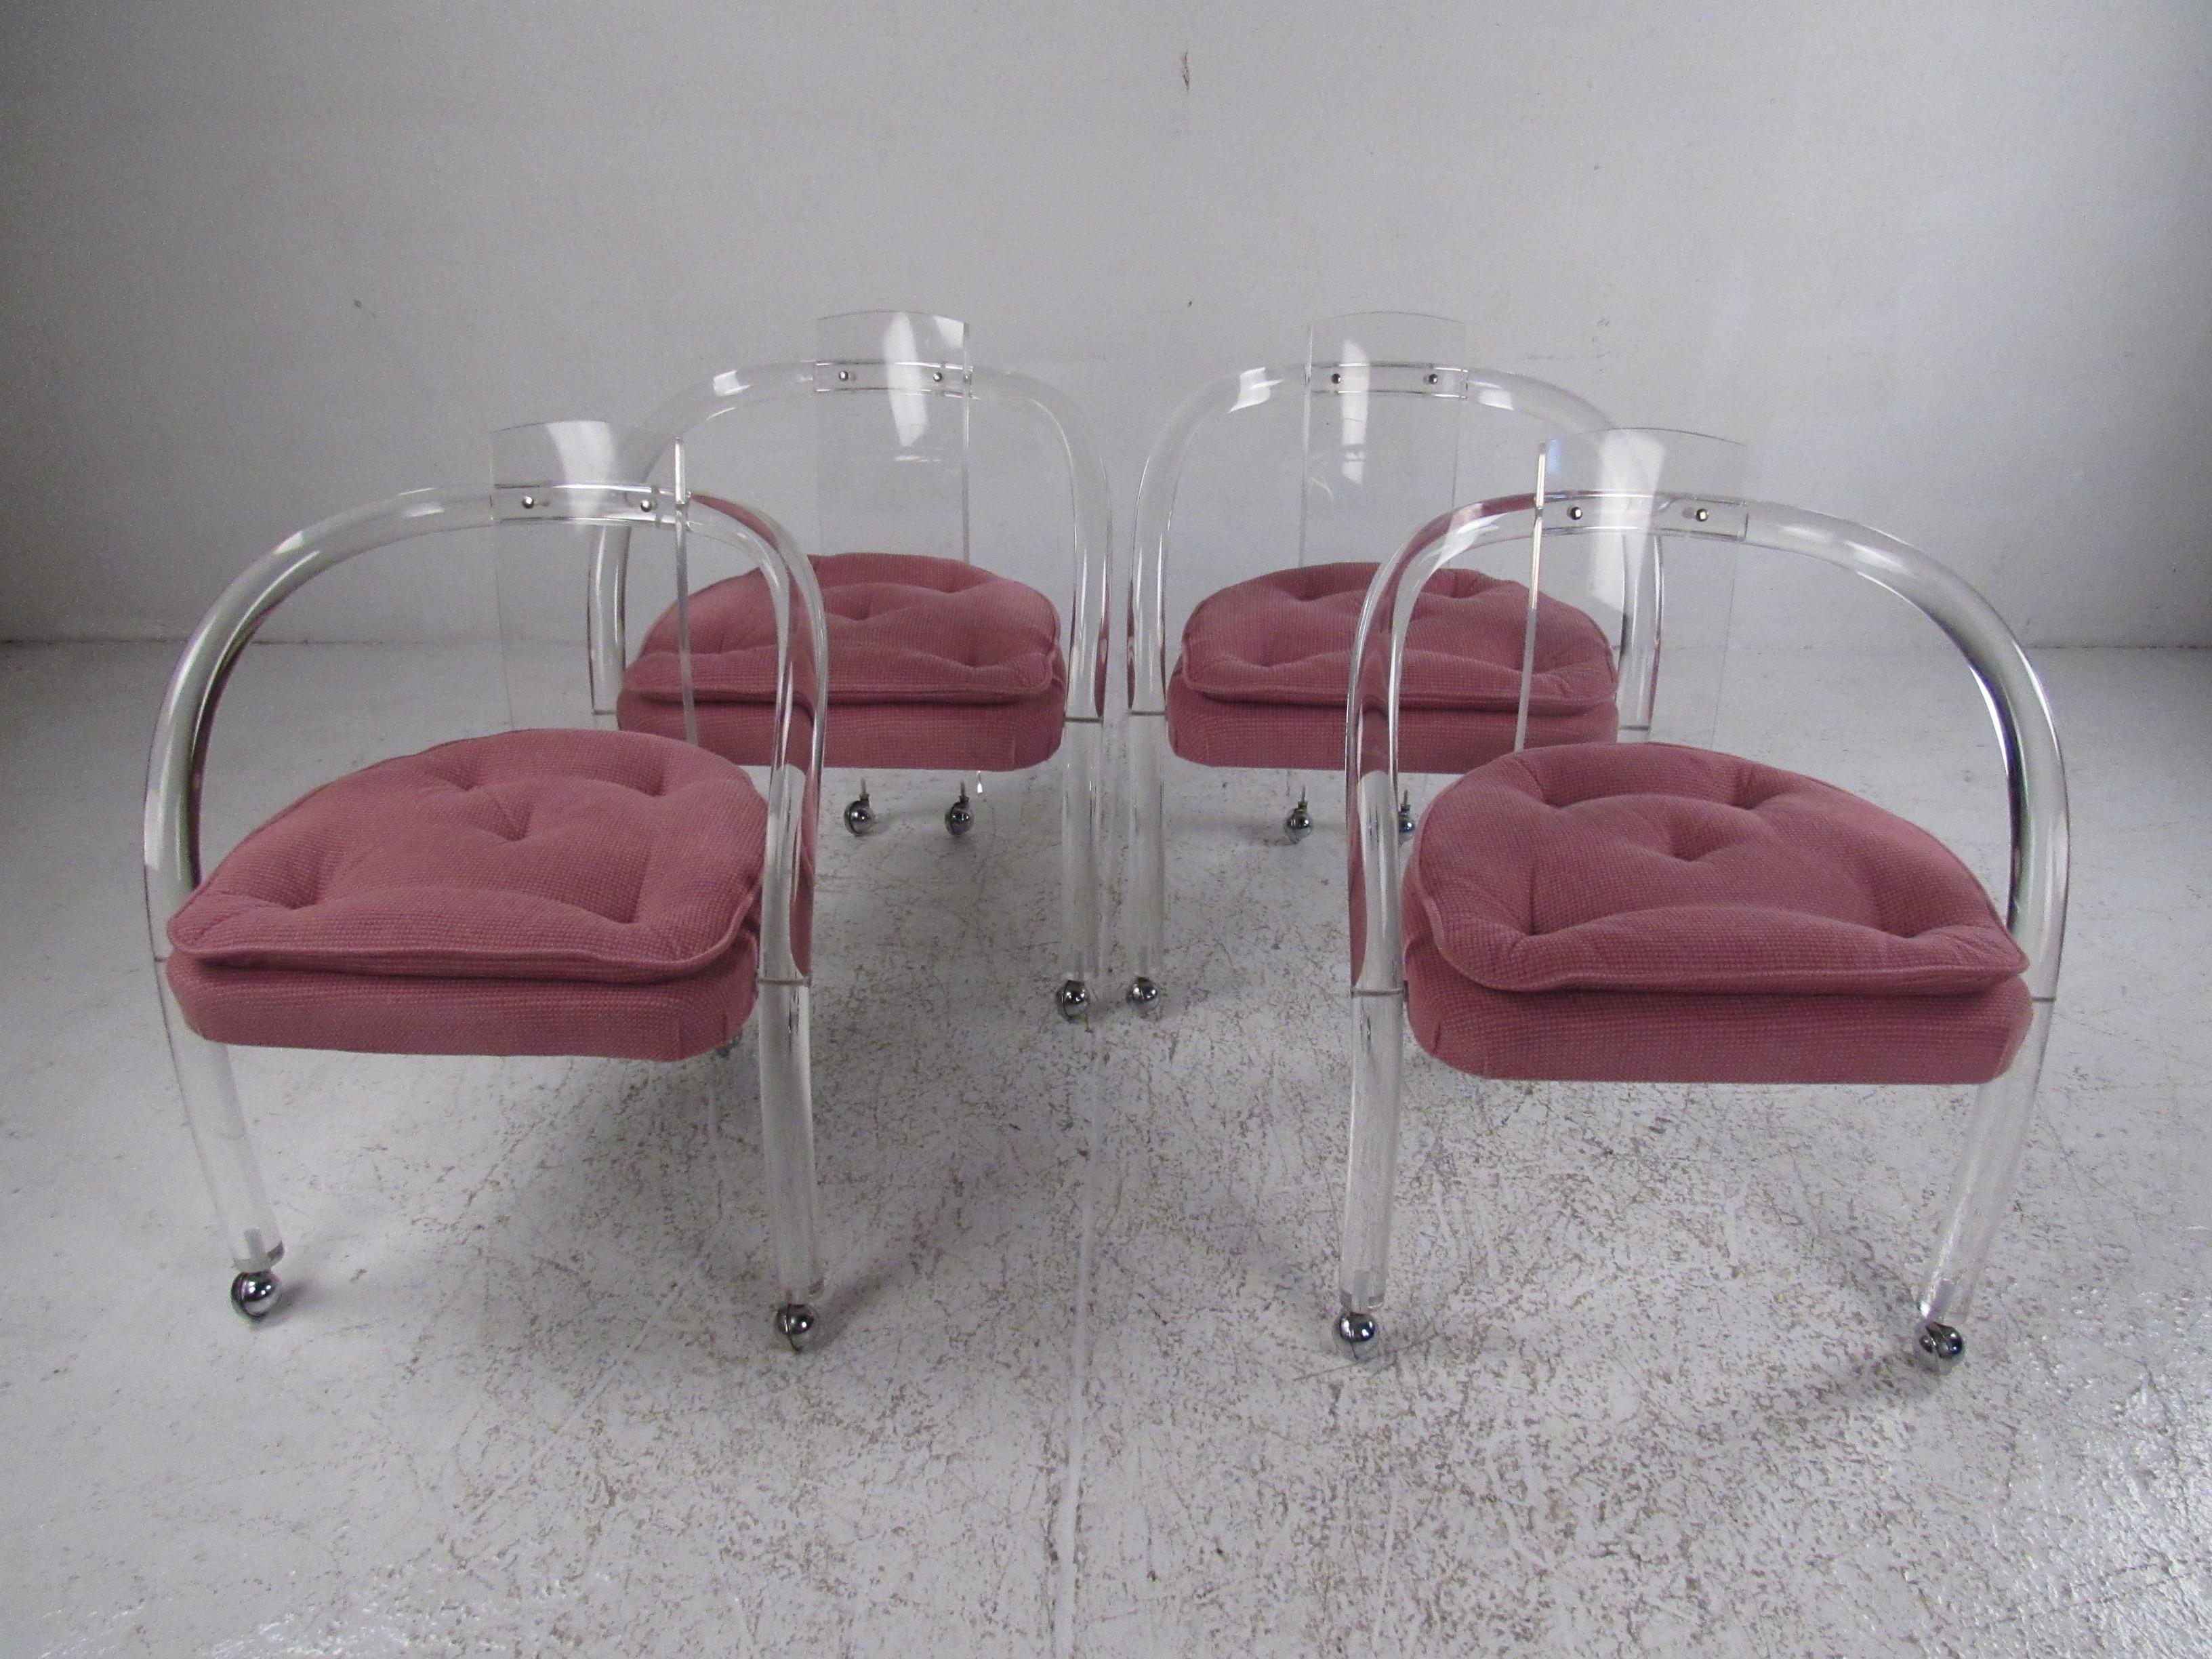 This stunning set of four Mid-Century Modern dining chairs boast a cylindrical Lucite frame with arched arm rests and a curved backrest. The thick padded seat is covered in a tufted purple fabric. A stylish and convenient design with castors on